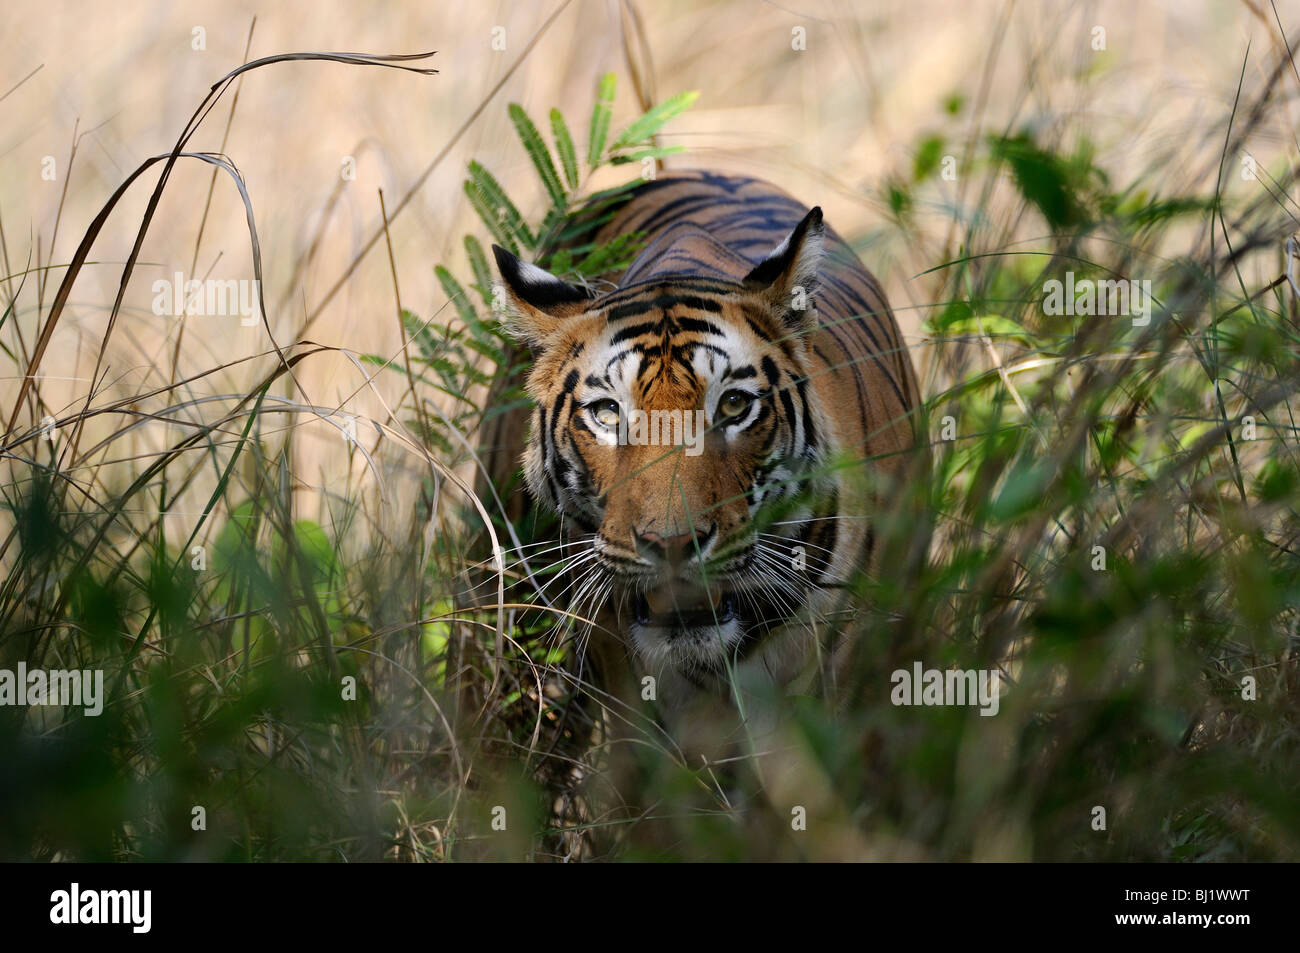 Bengal tigress gets close while crossing the jungle road, shot in bandhavgarh tiger reserve, India Stock Photo